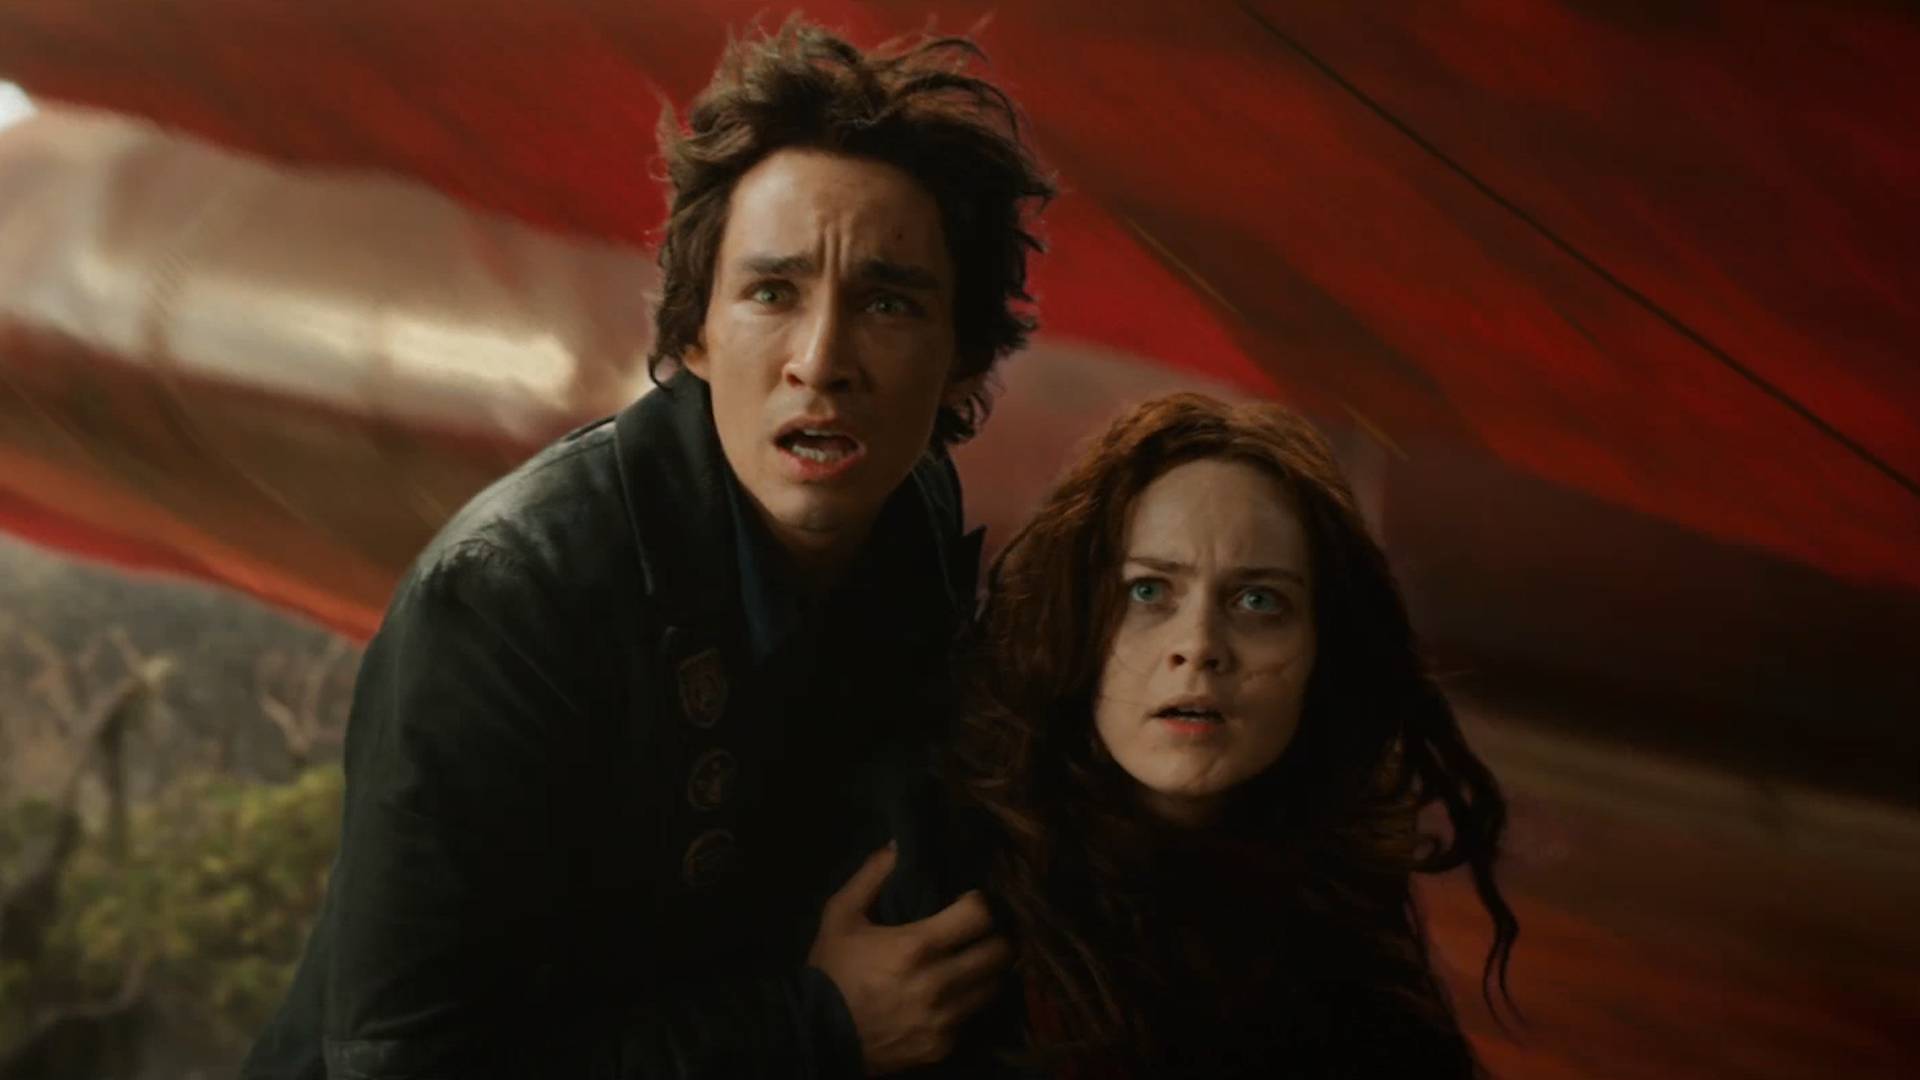 Robert Sheehan and Hera Hilmar as Tom and Hester in Mortal Engines